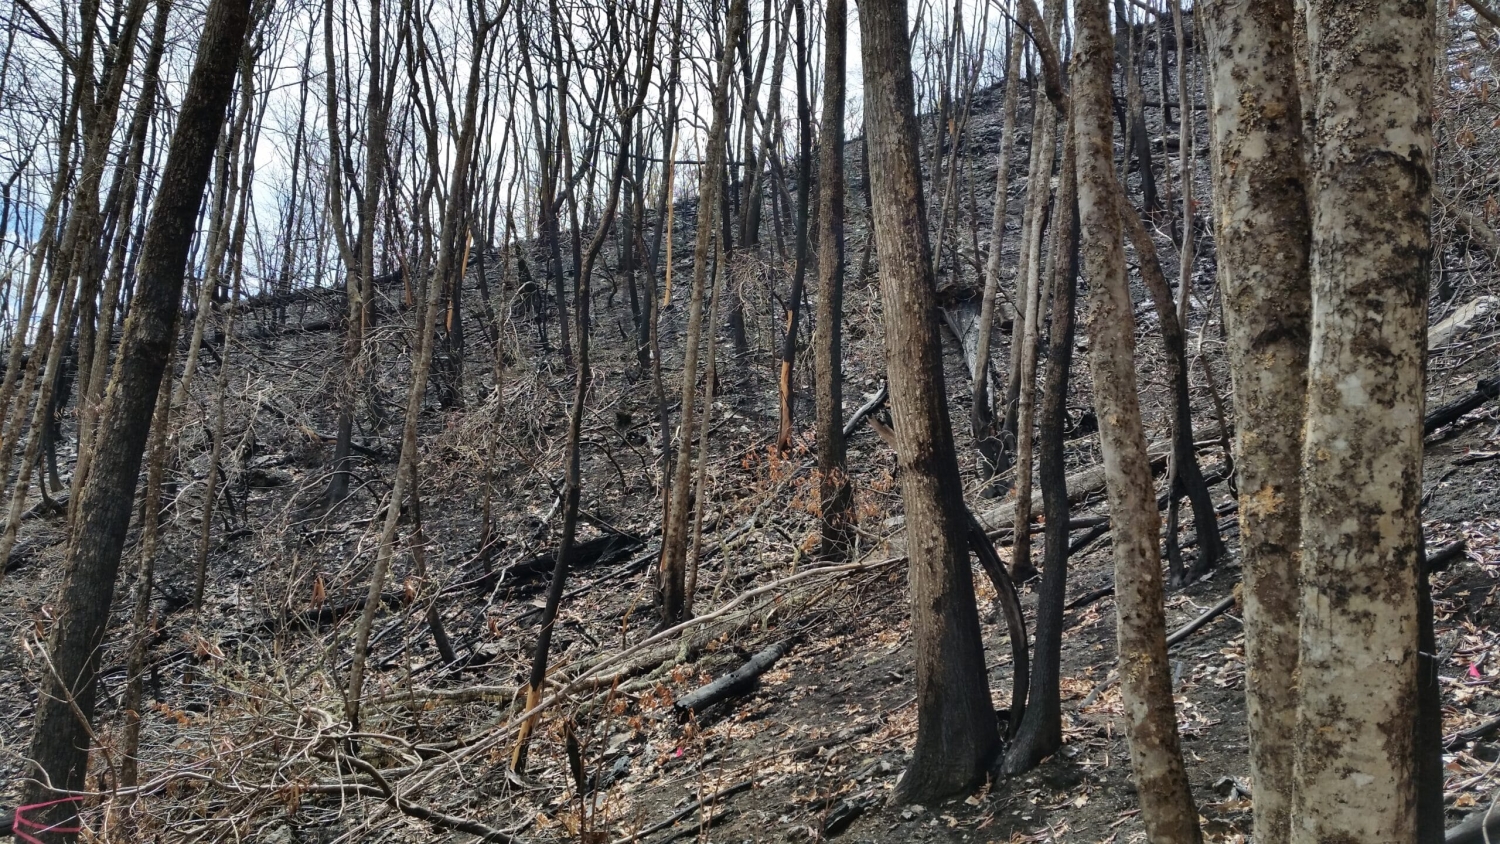 Forest burned in high-severity wildfire.